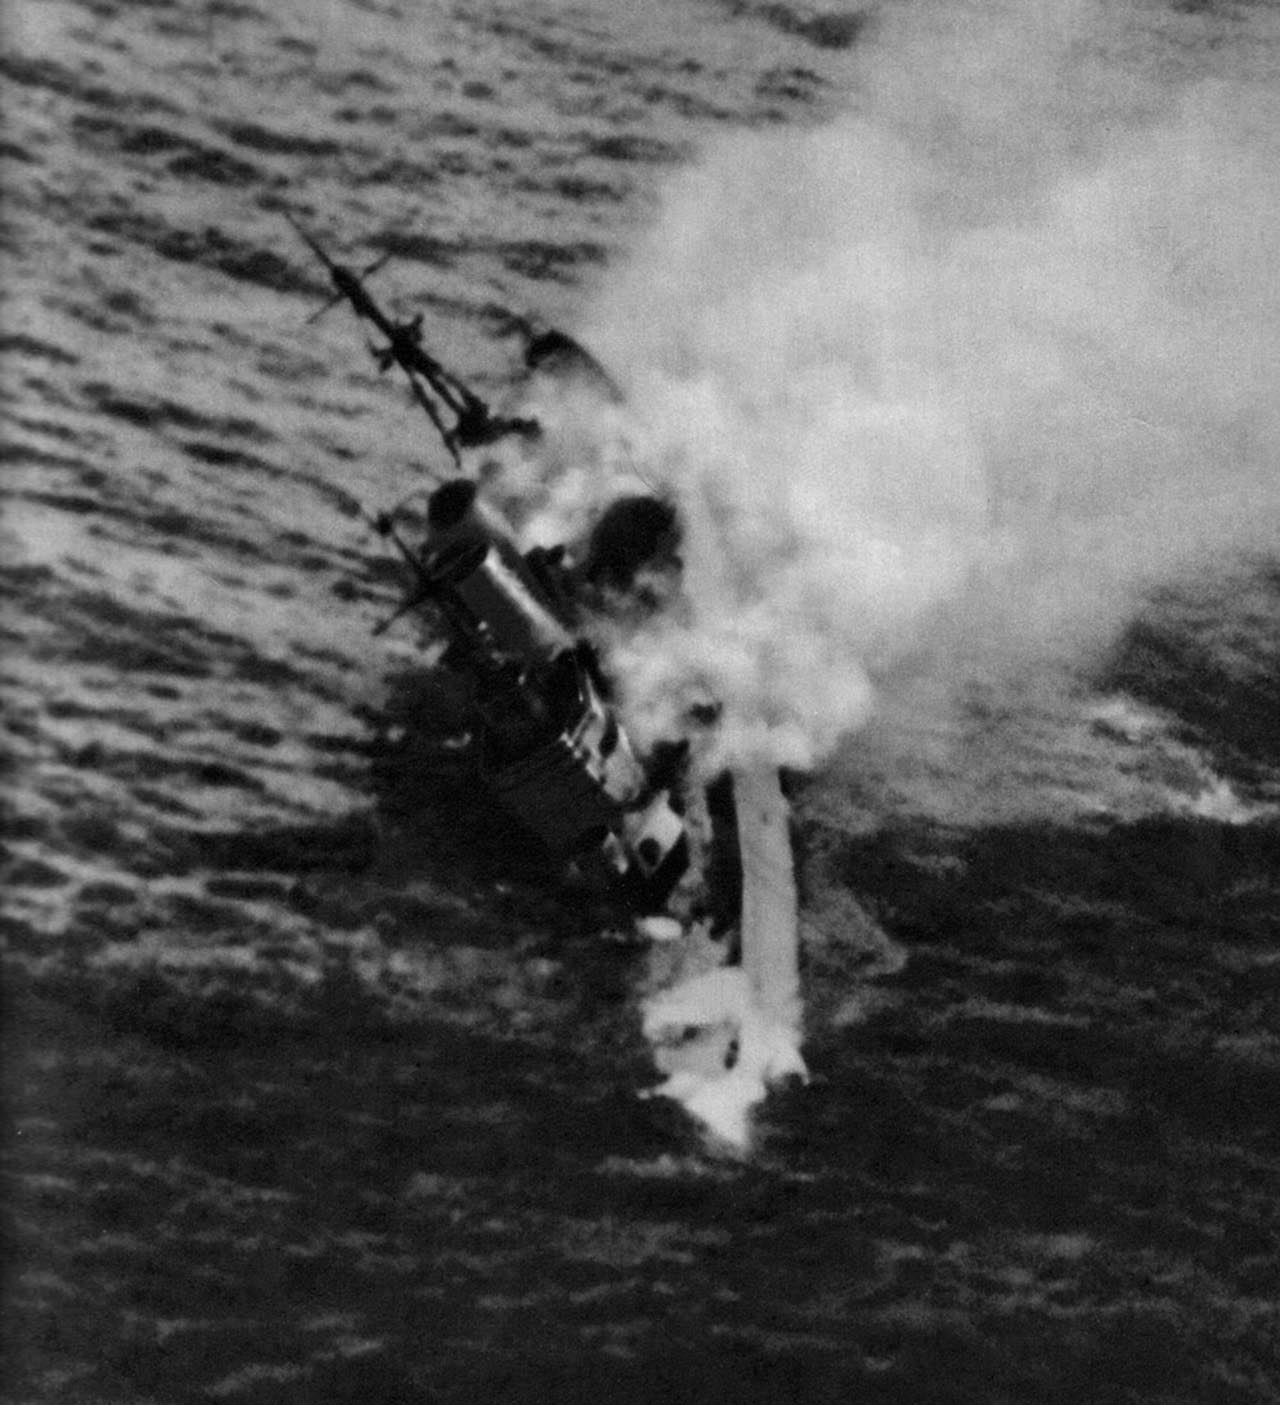 HMS Exeter capsizing to starboard, March 1st 1942